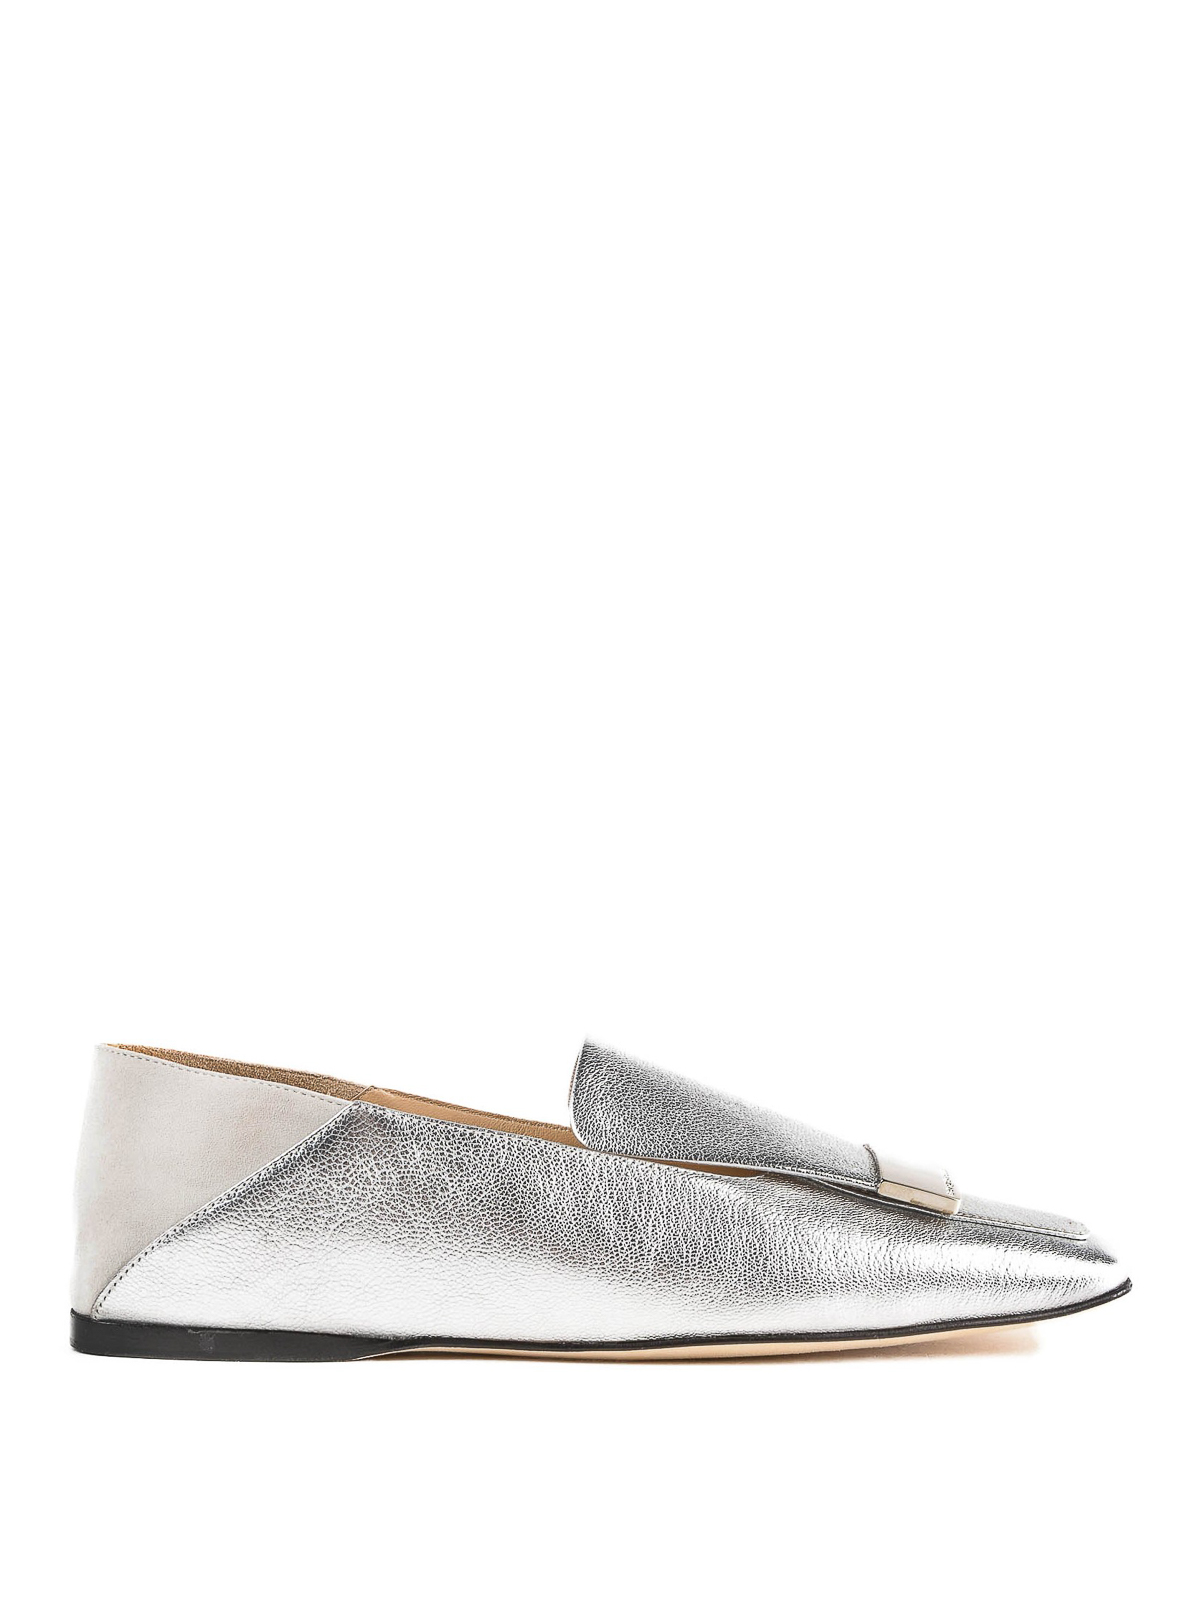 Loafers & Slippers Sergio Rossi - Sr1 silver leather slippers 